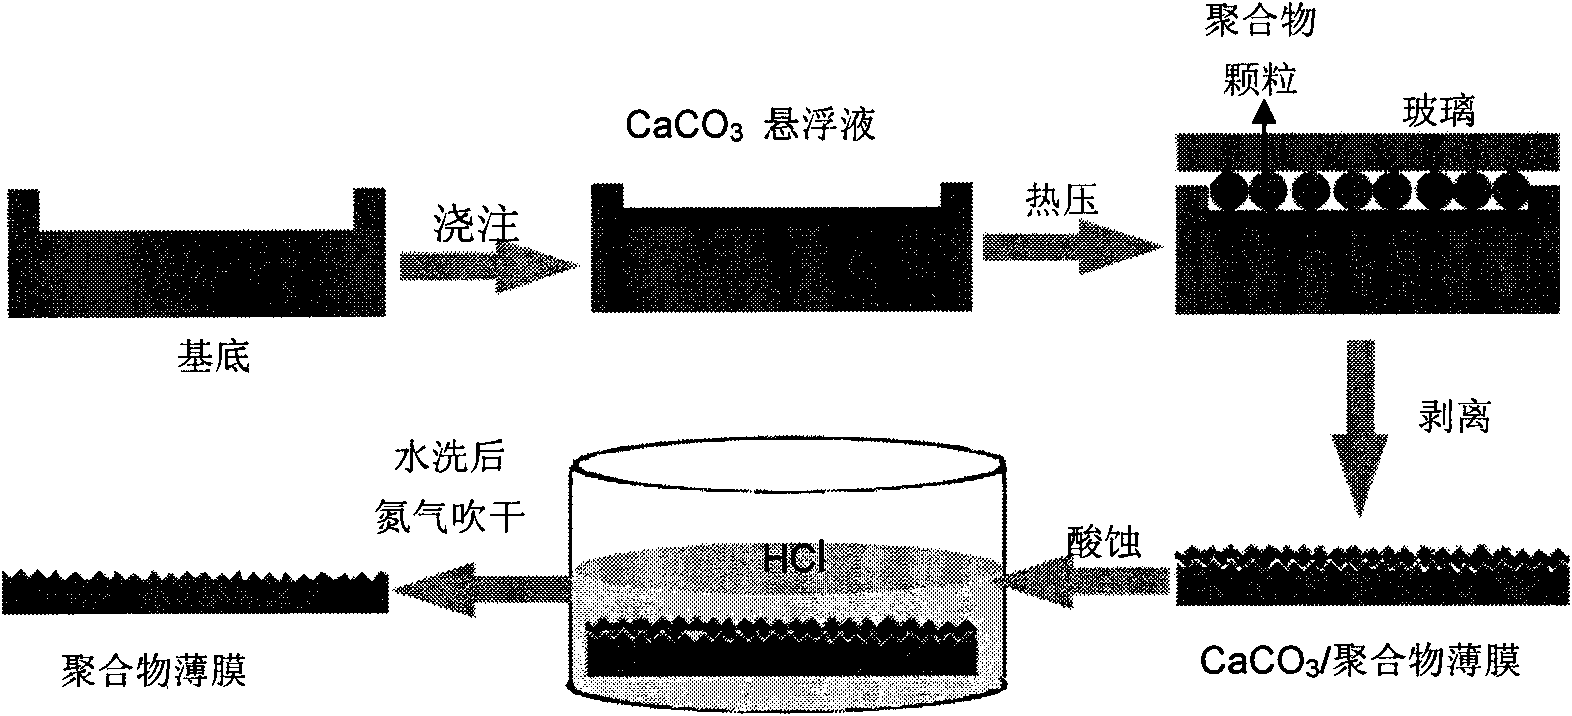 Method for preparing polymer superhydrophobic surface by CaCO3 template method